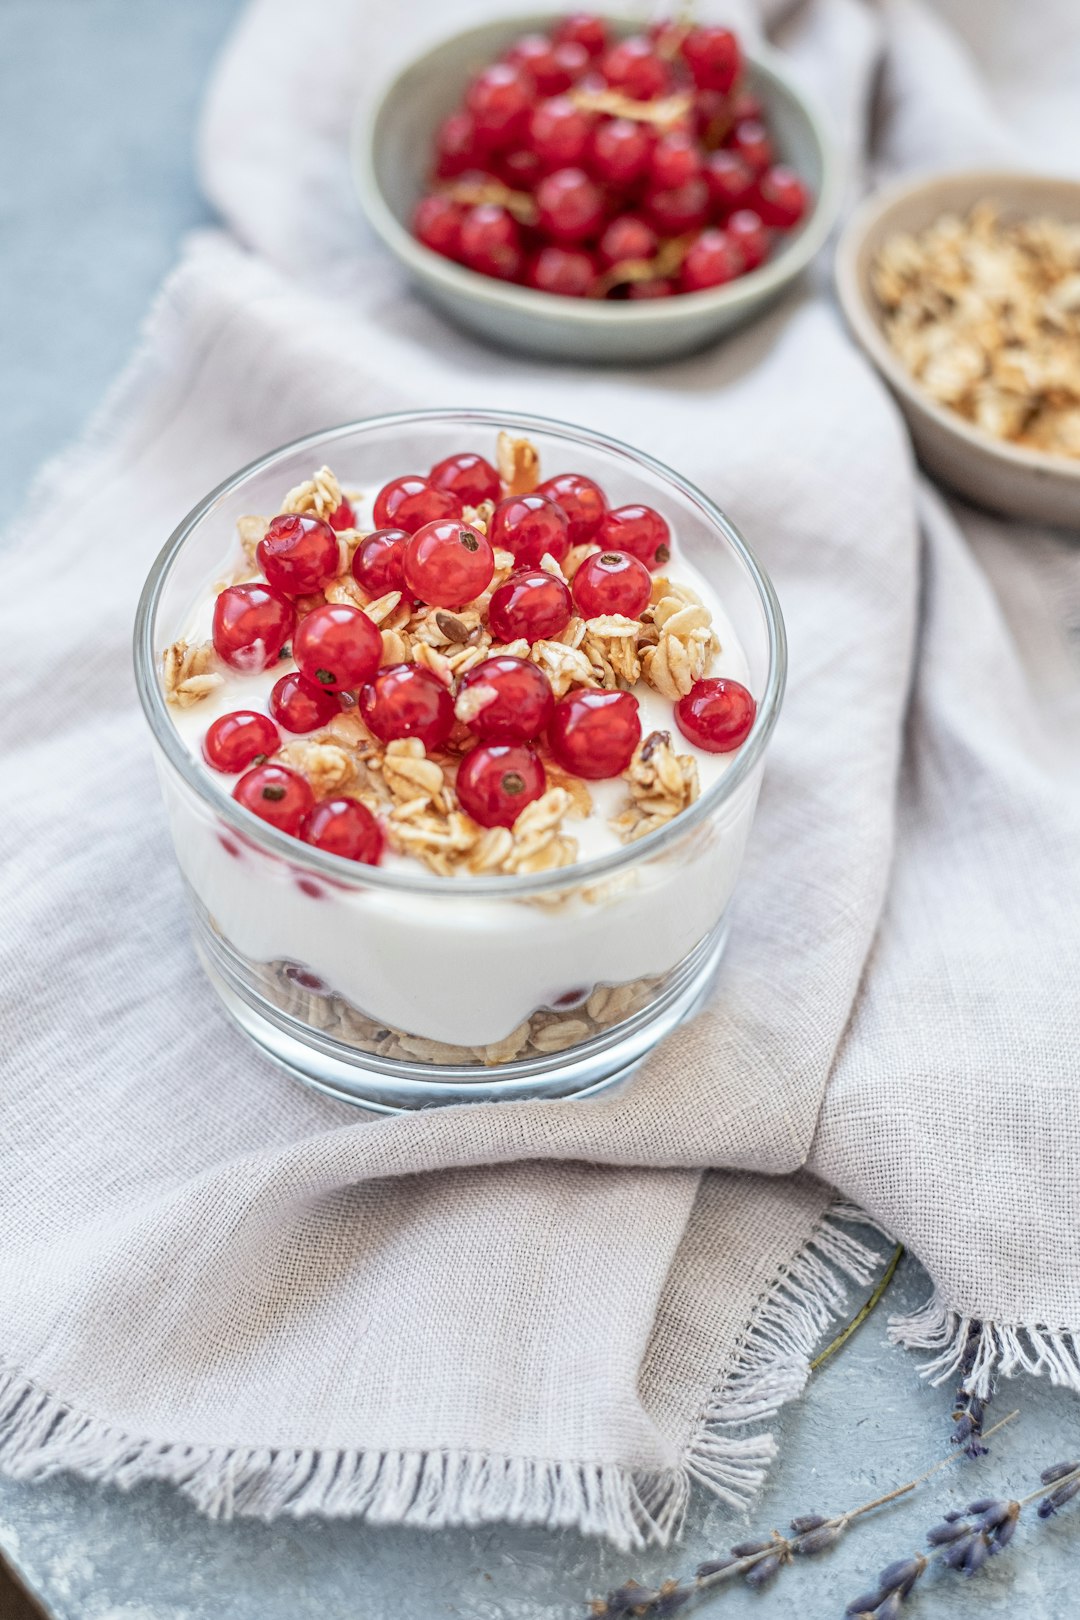 clear glass bowl with red and white berries